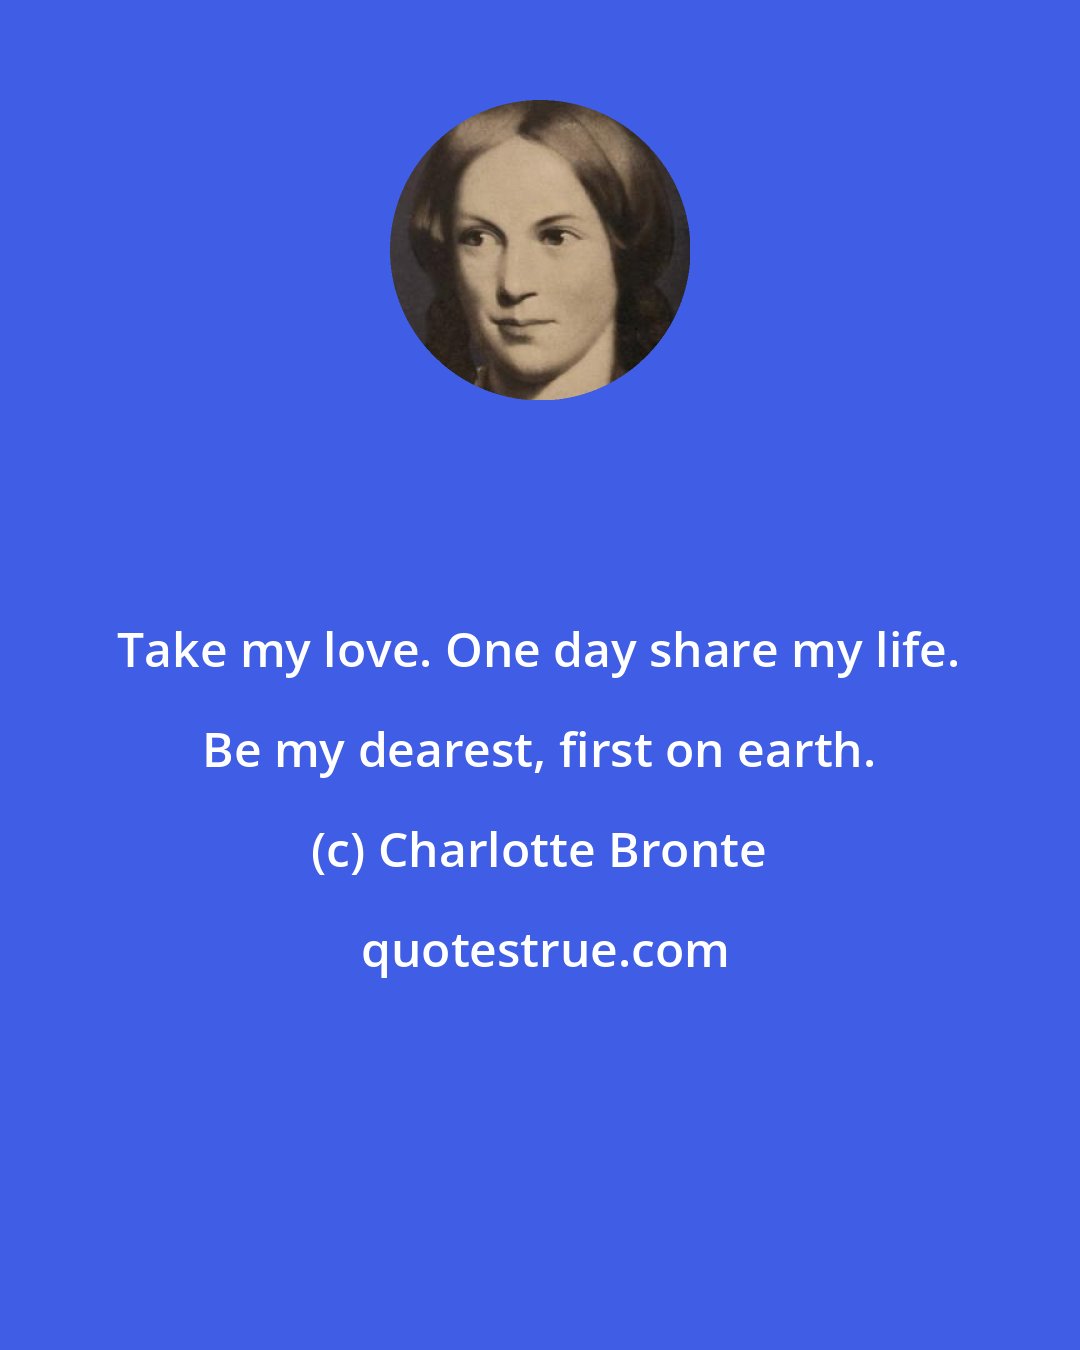 Charlotte Bronte: Take my love. One day share my life. Be my dearest, first on earth.